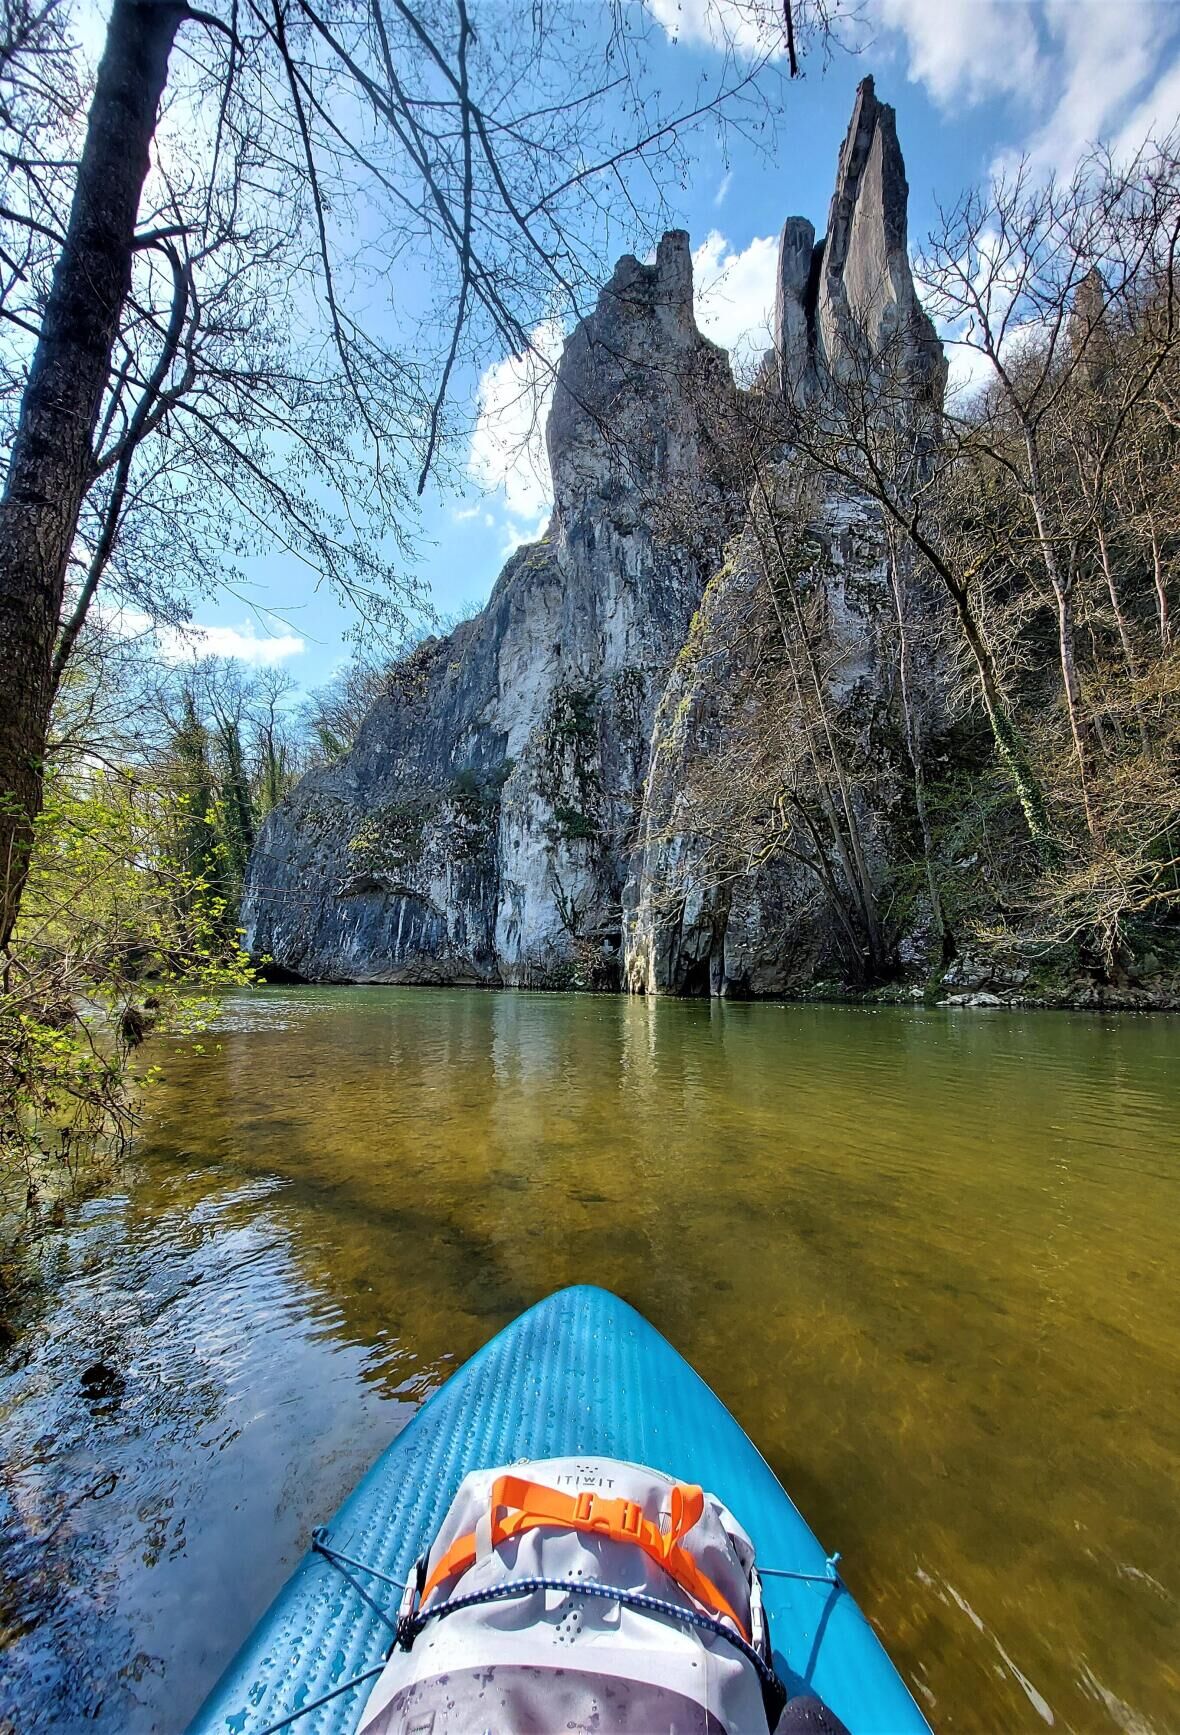 Going down the Lesse on a compact Stand-Up Paddleboard